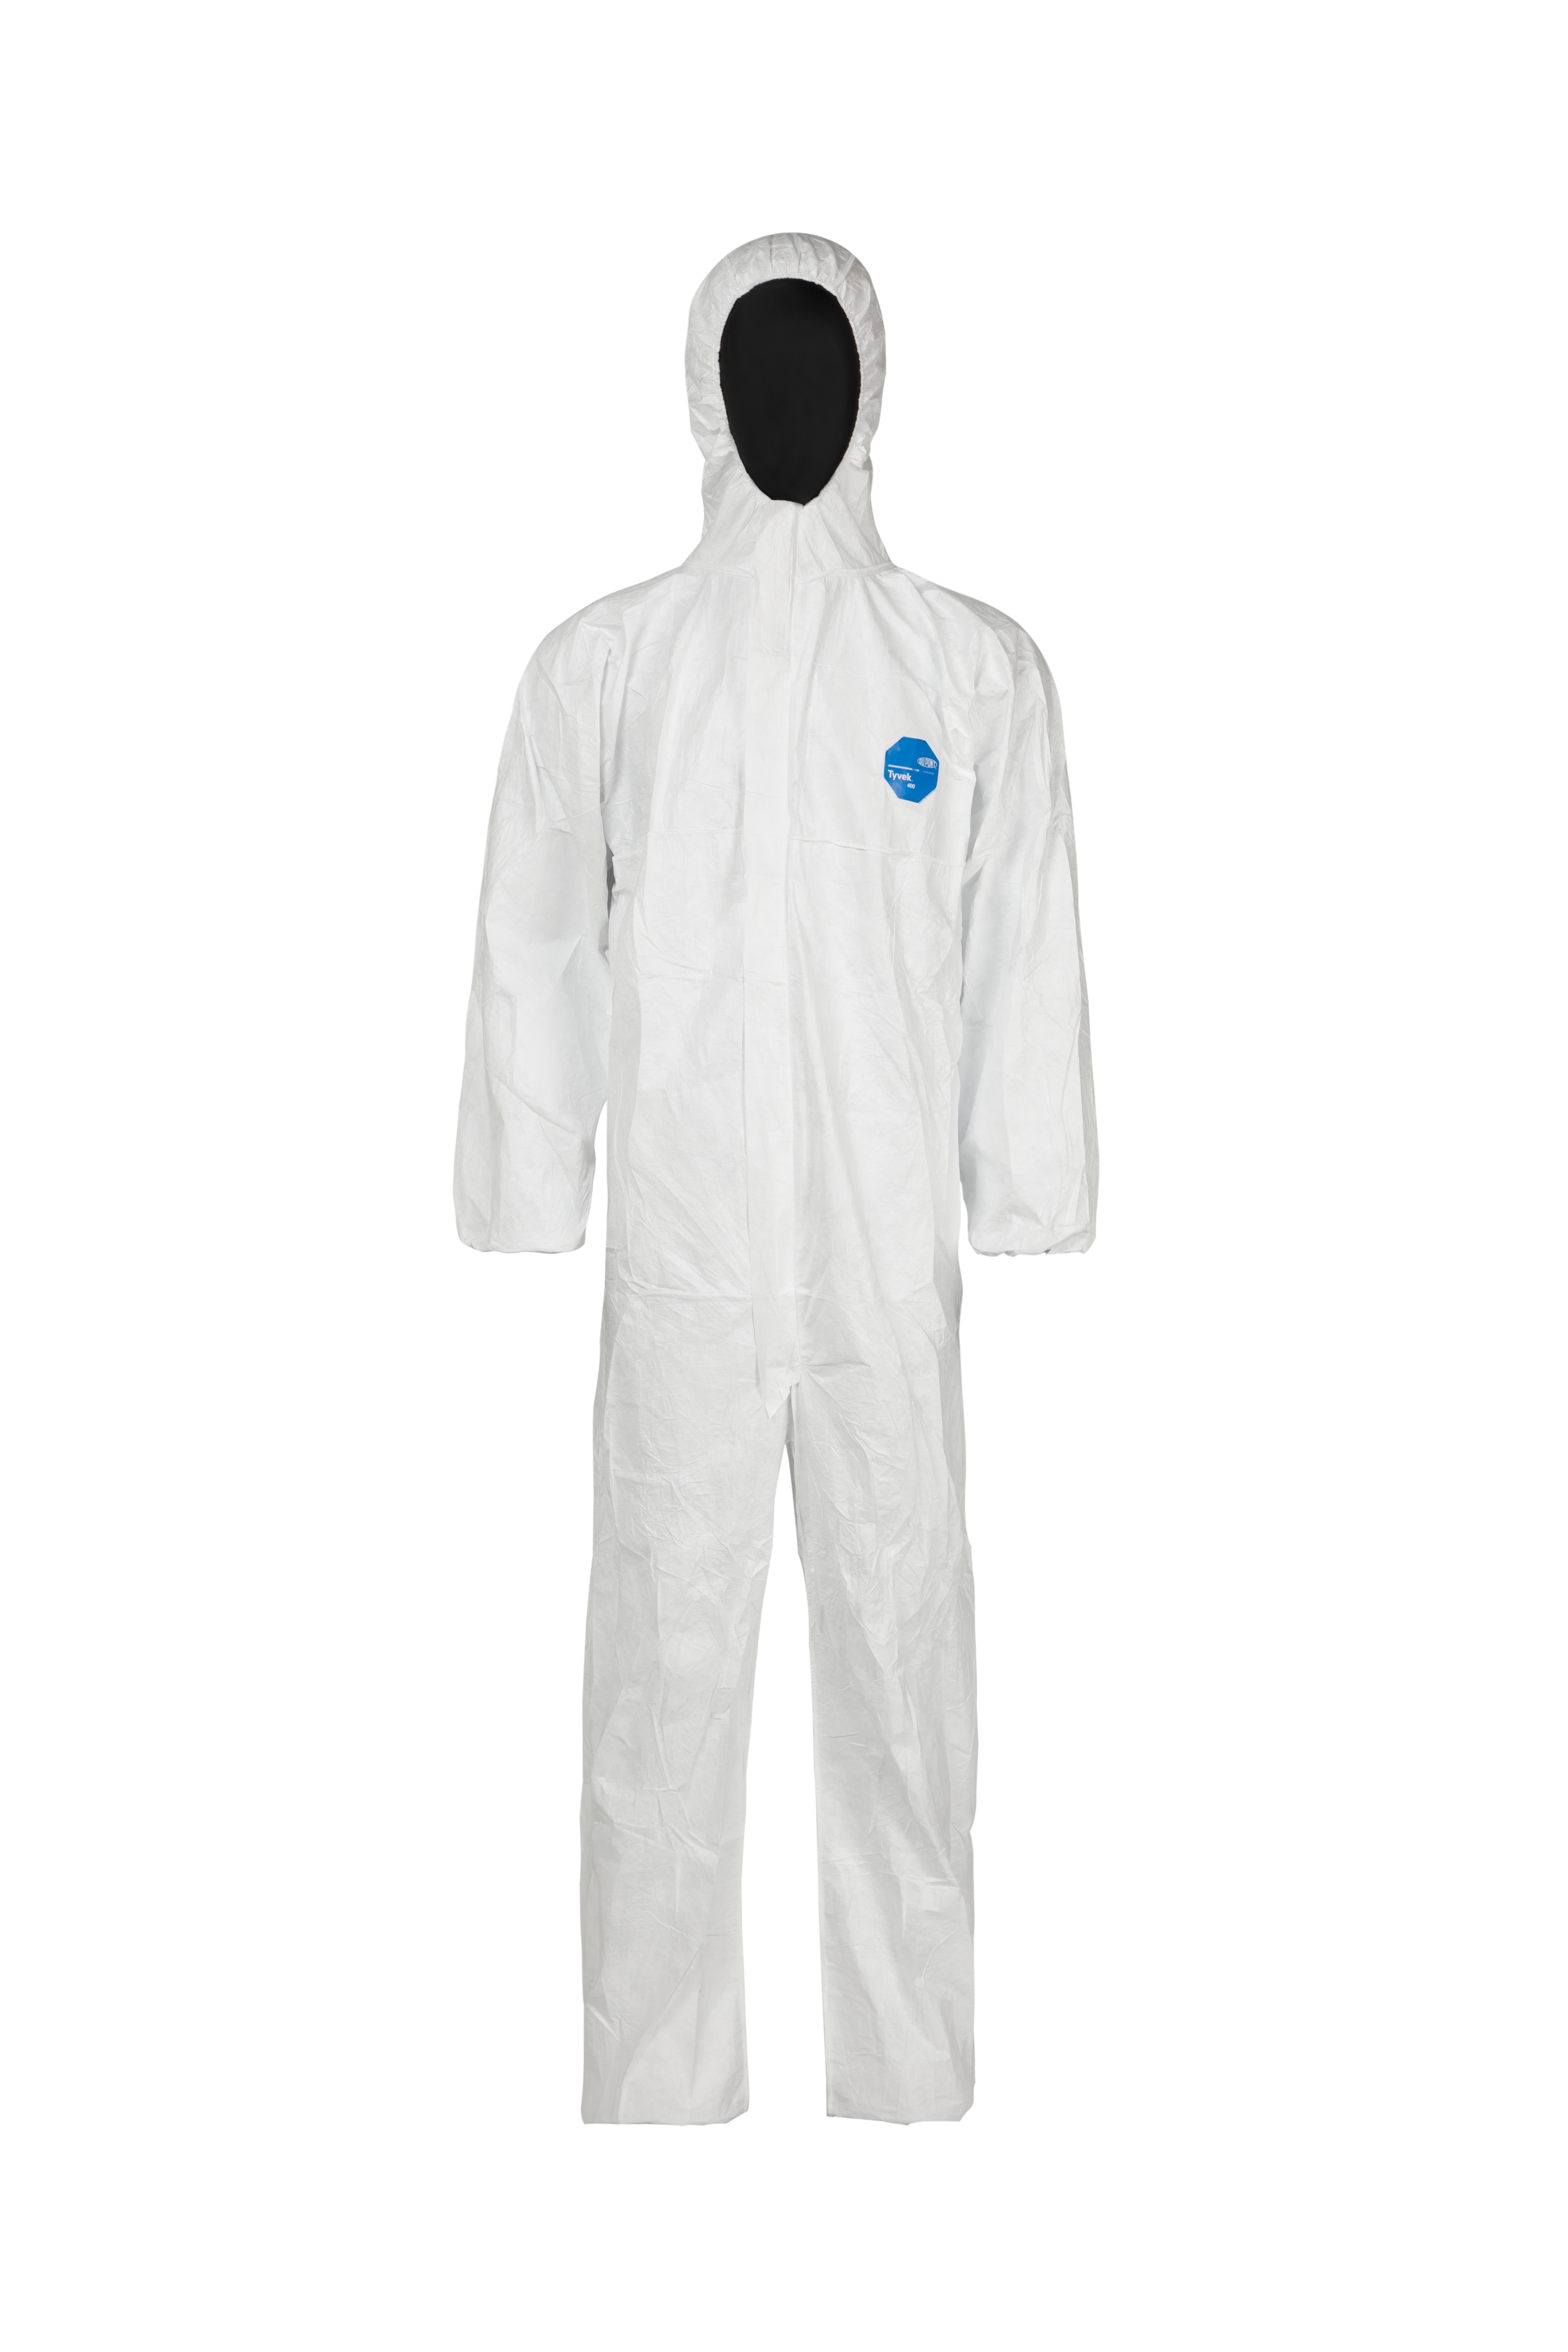 Pharma 530 Disposable Protective Suit Coverall Medical Virus